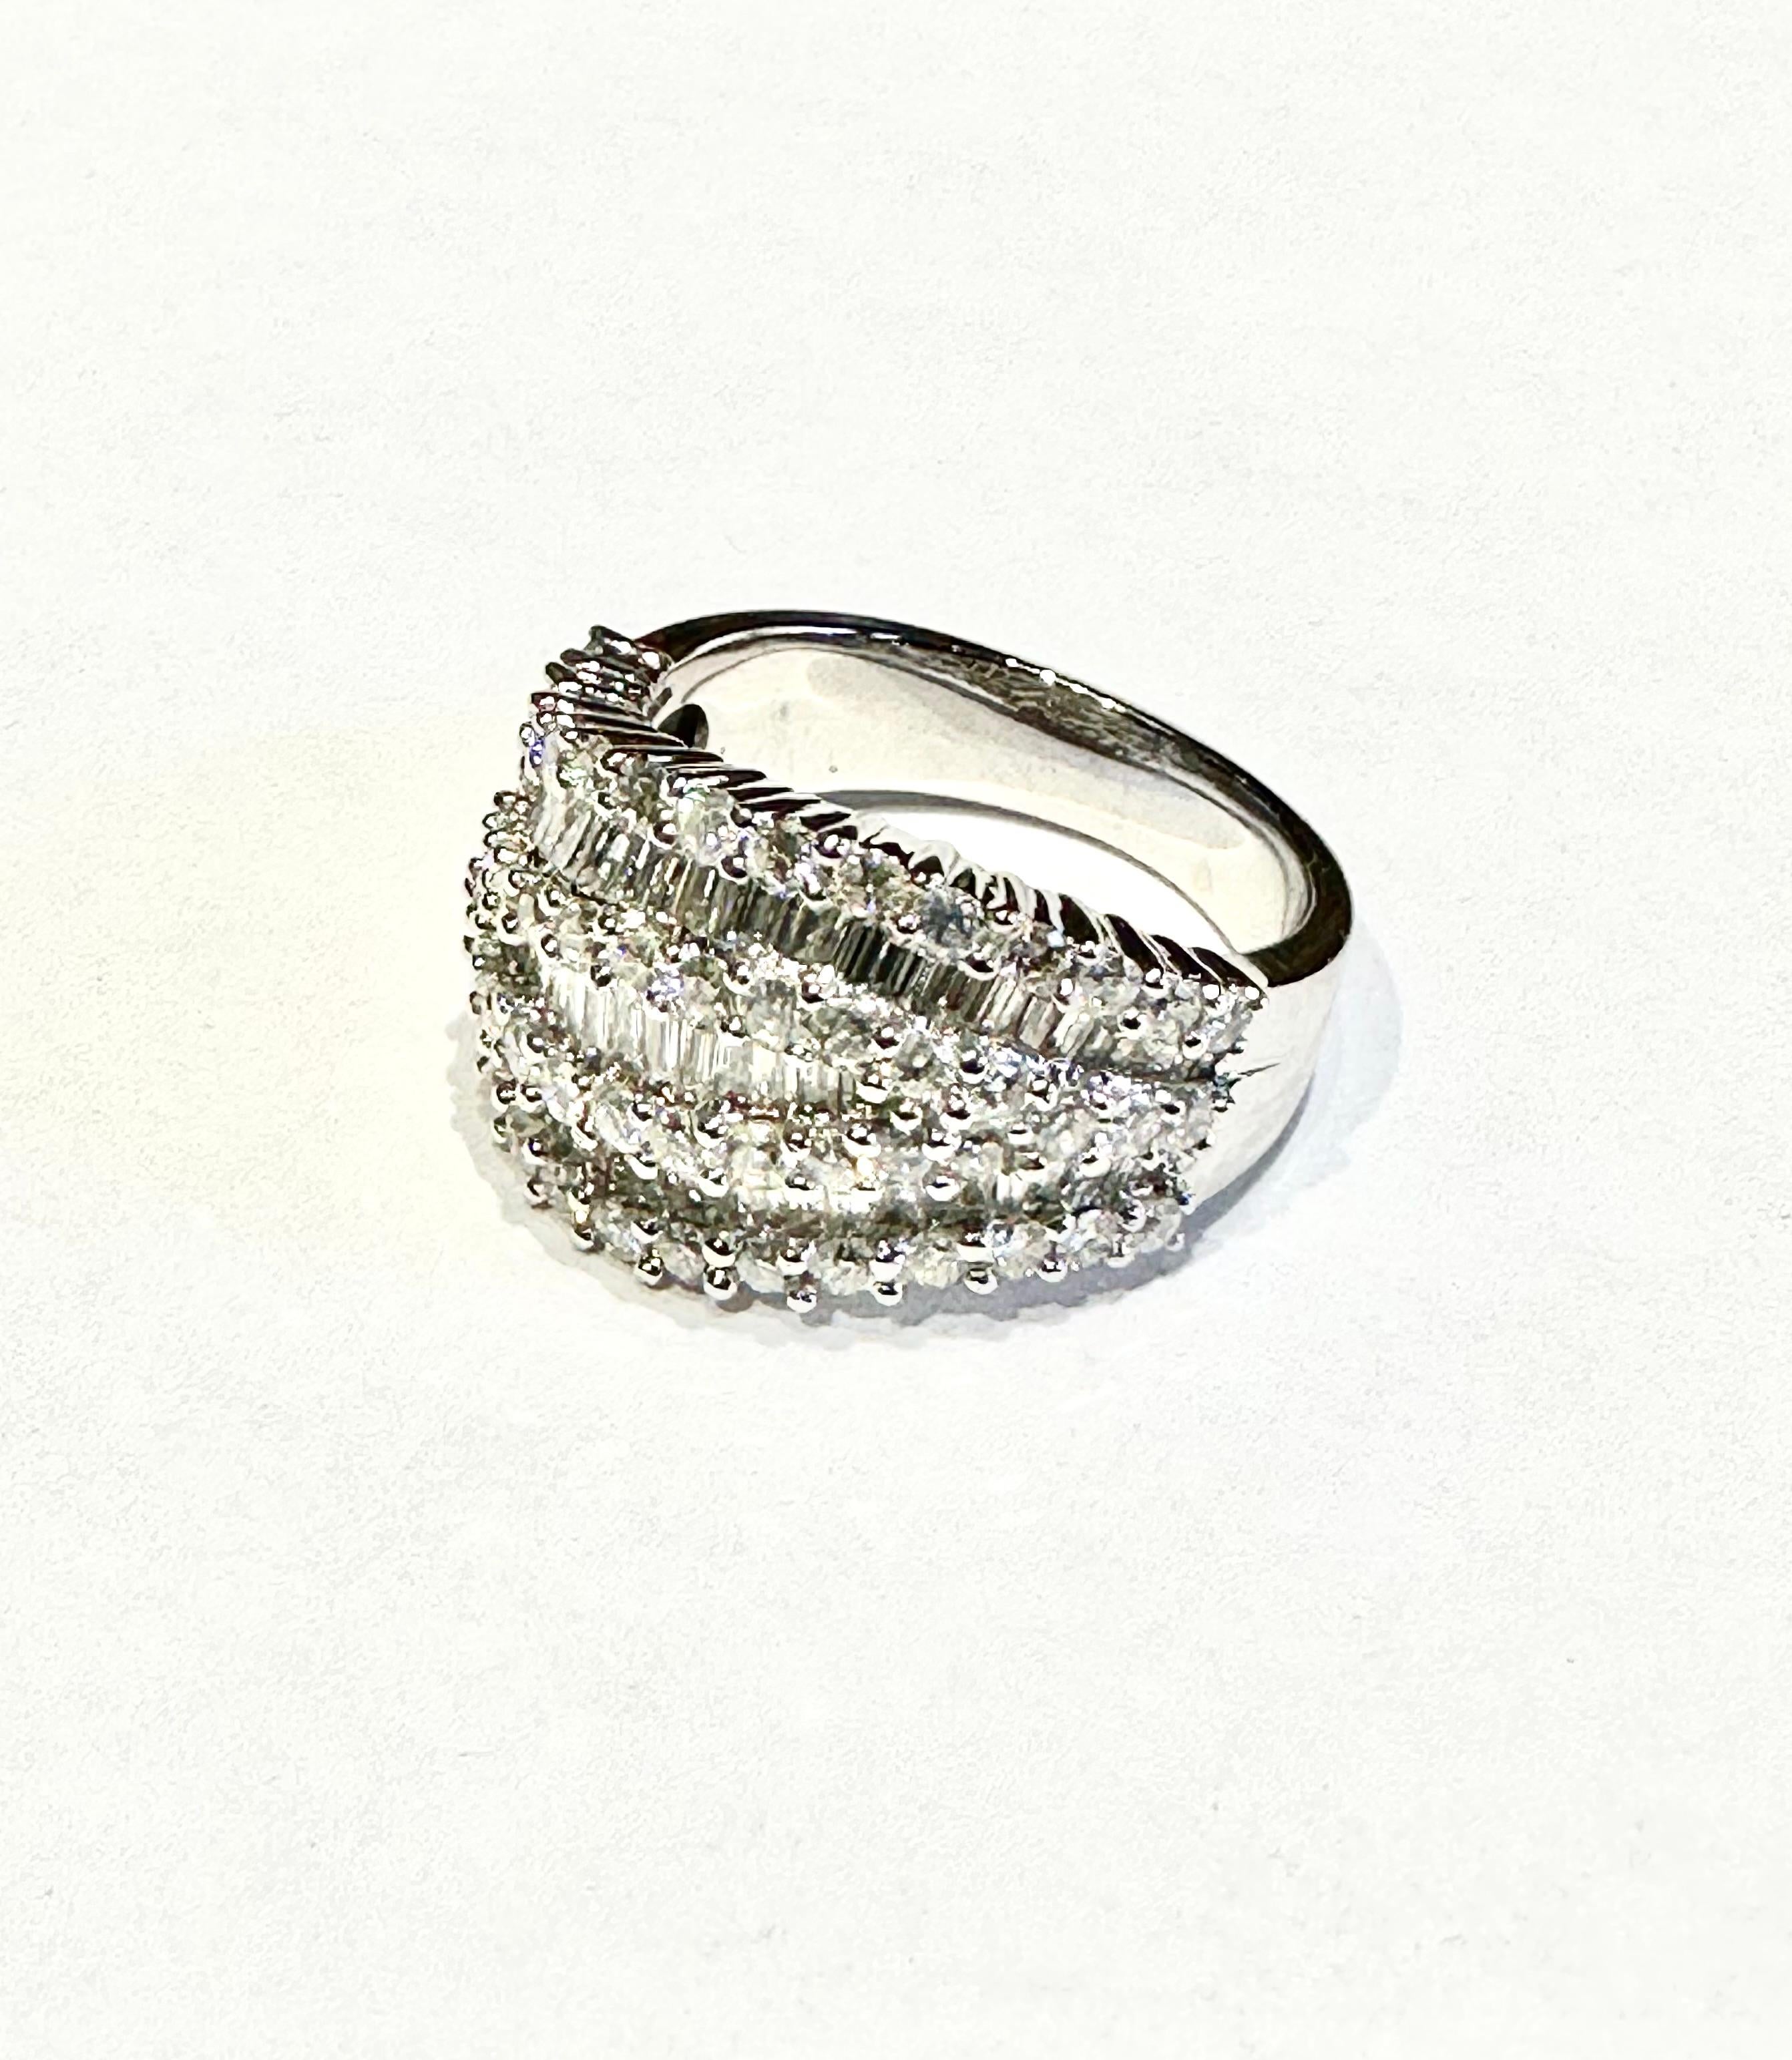 Ladies 18k 2.40 CT T.W.  Diamond Fashion Ring  Baguette and Round Diamonds

Description / Condition: New. All jewelry has been professionally scrutinized and cleaned prior to being offered for sale. 

Manufacturer: Custom made by A Step Back in